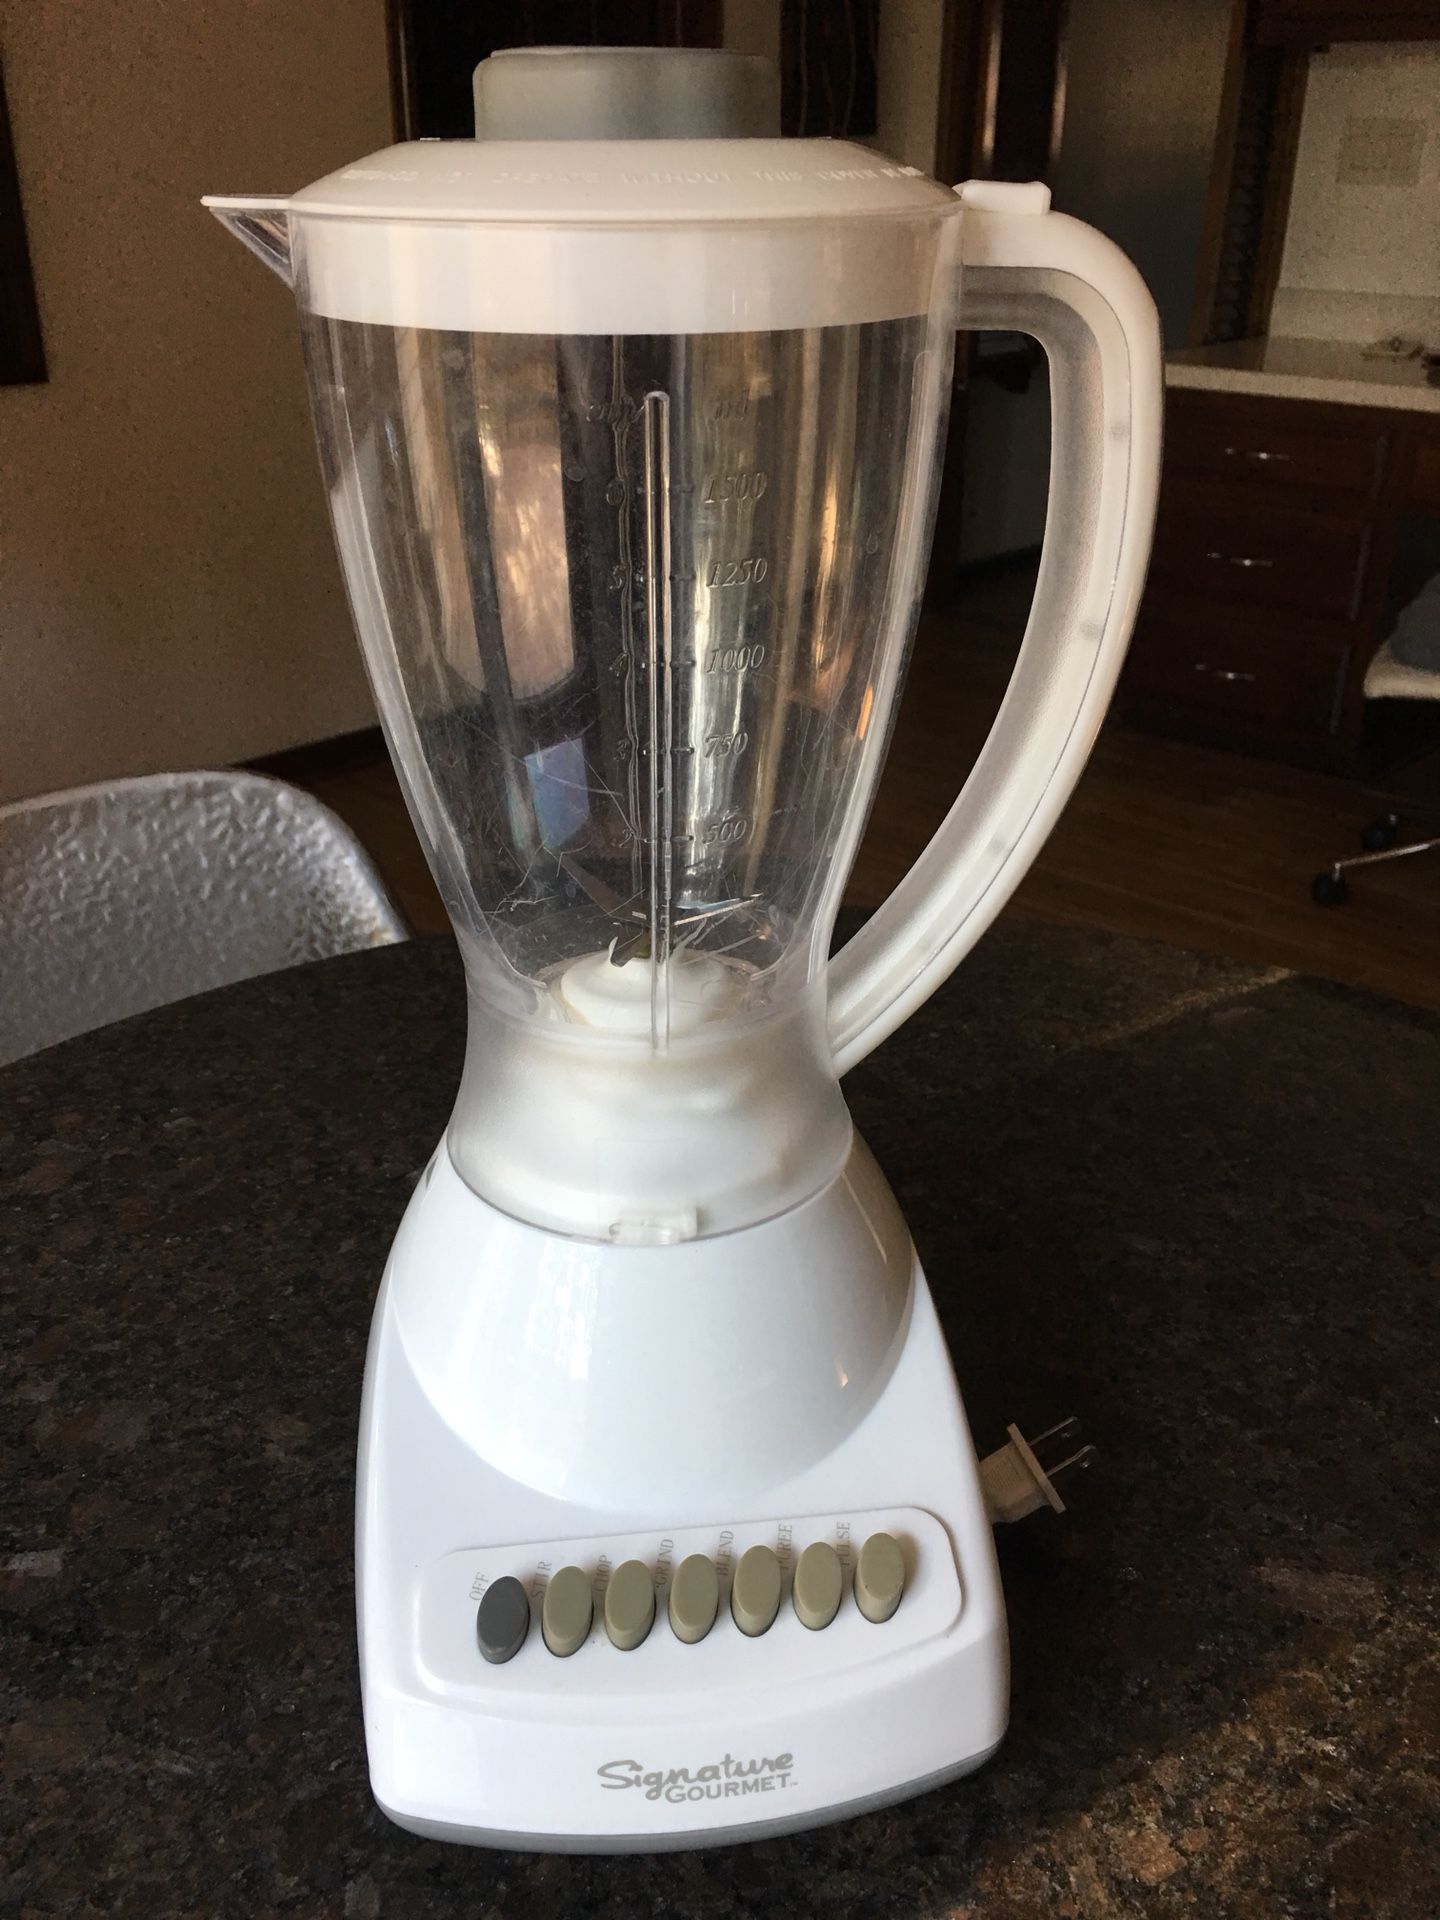 Toastmaster Blender for Sale in Fair Lawn, NJ - OfferUp